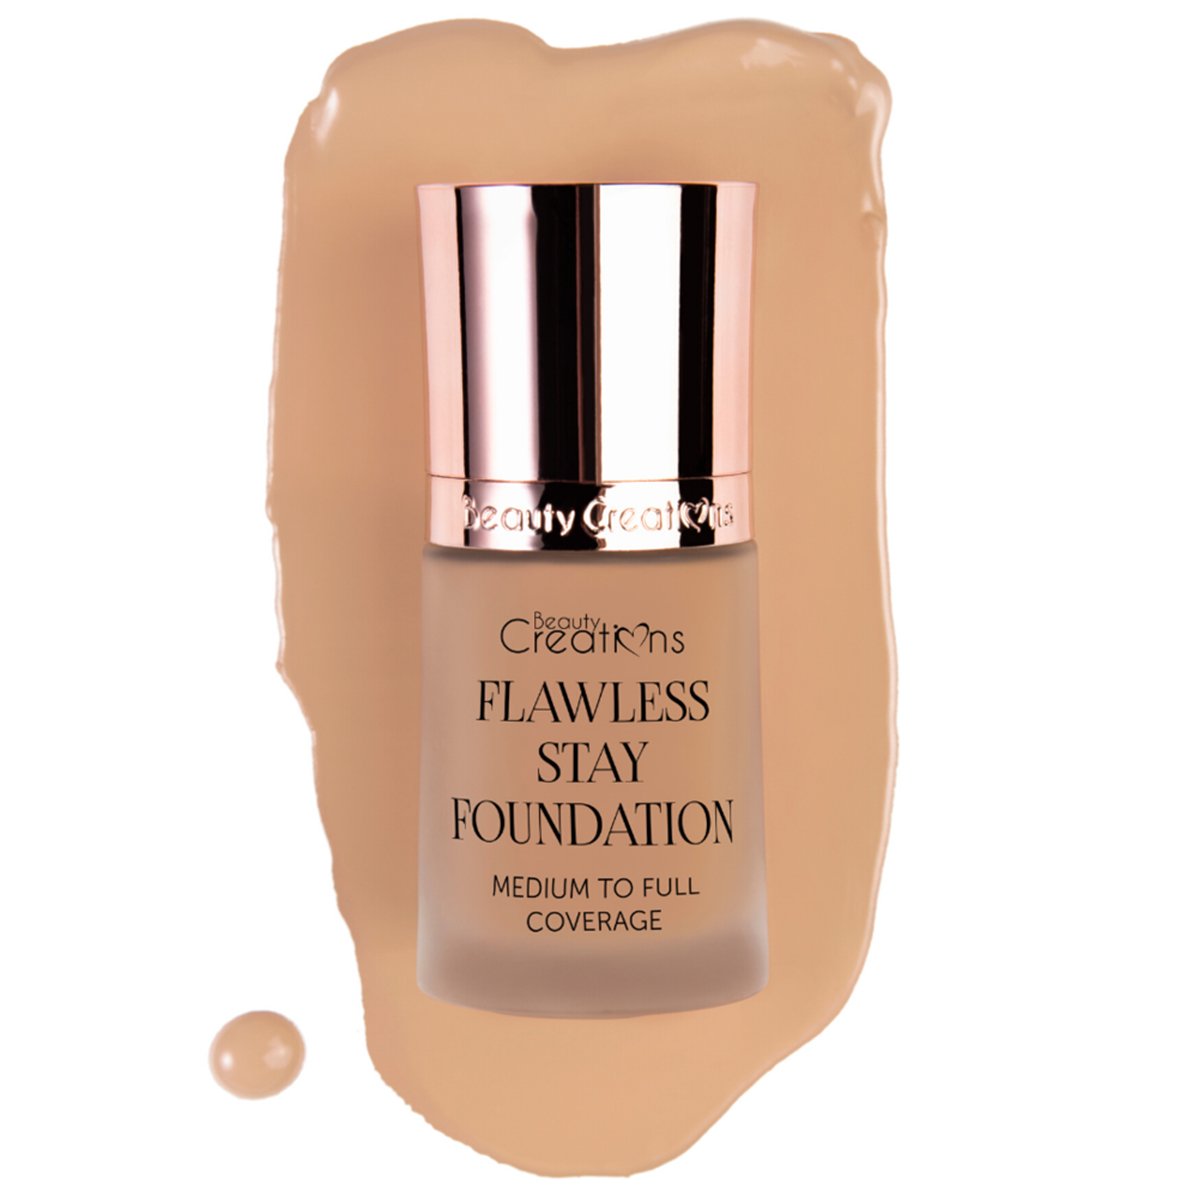 FLAWLESS STAY FOUNDATION 7.5 - BEAUTY CREATIONS